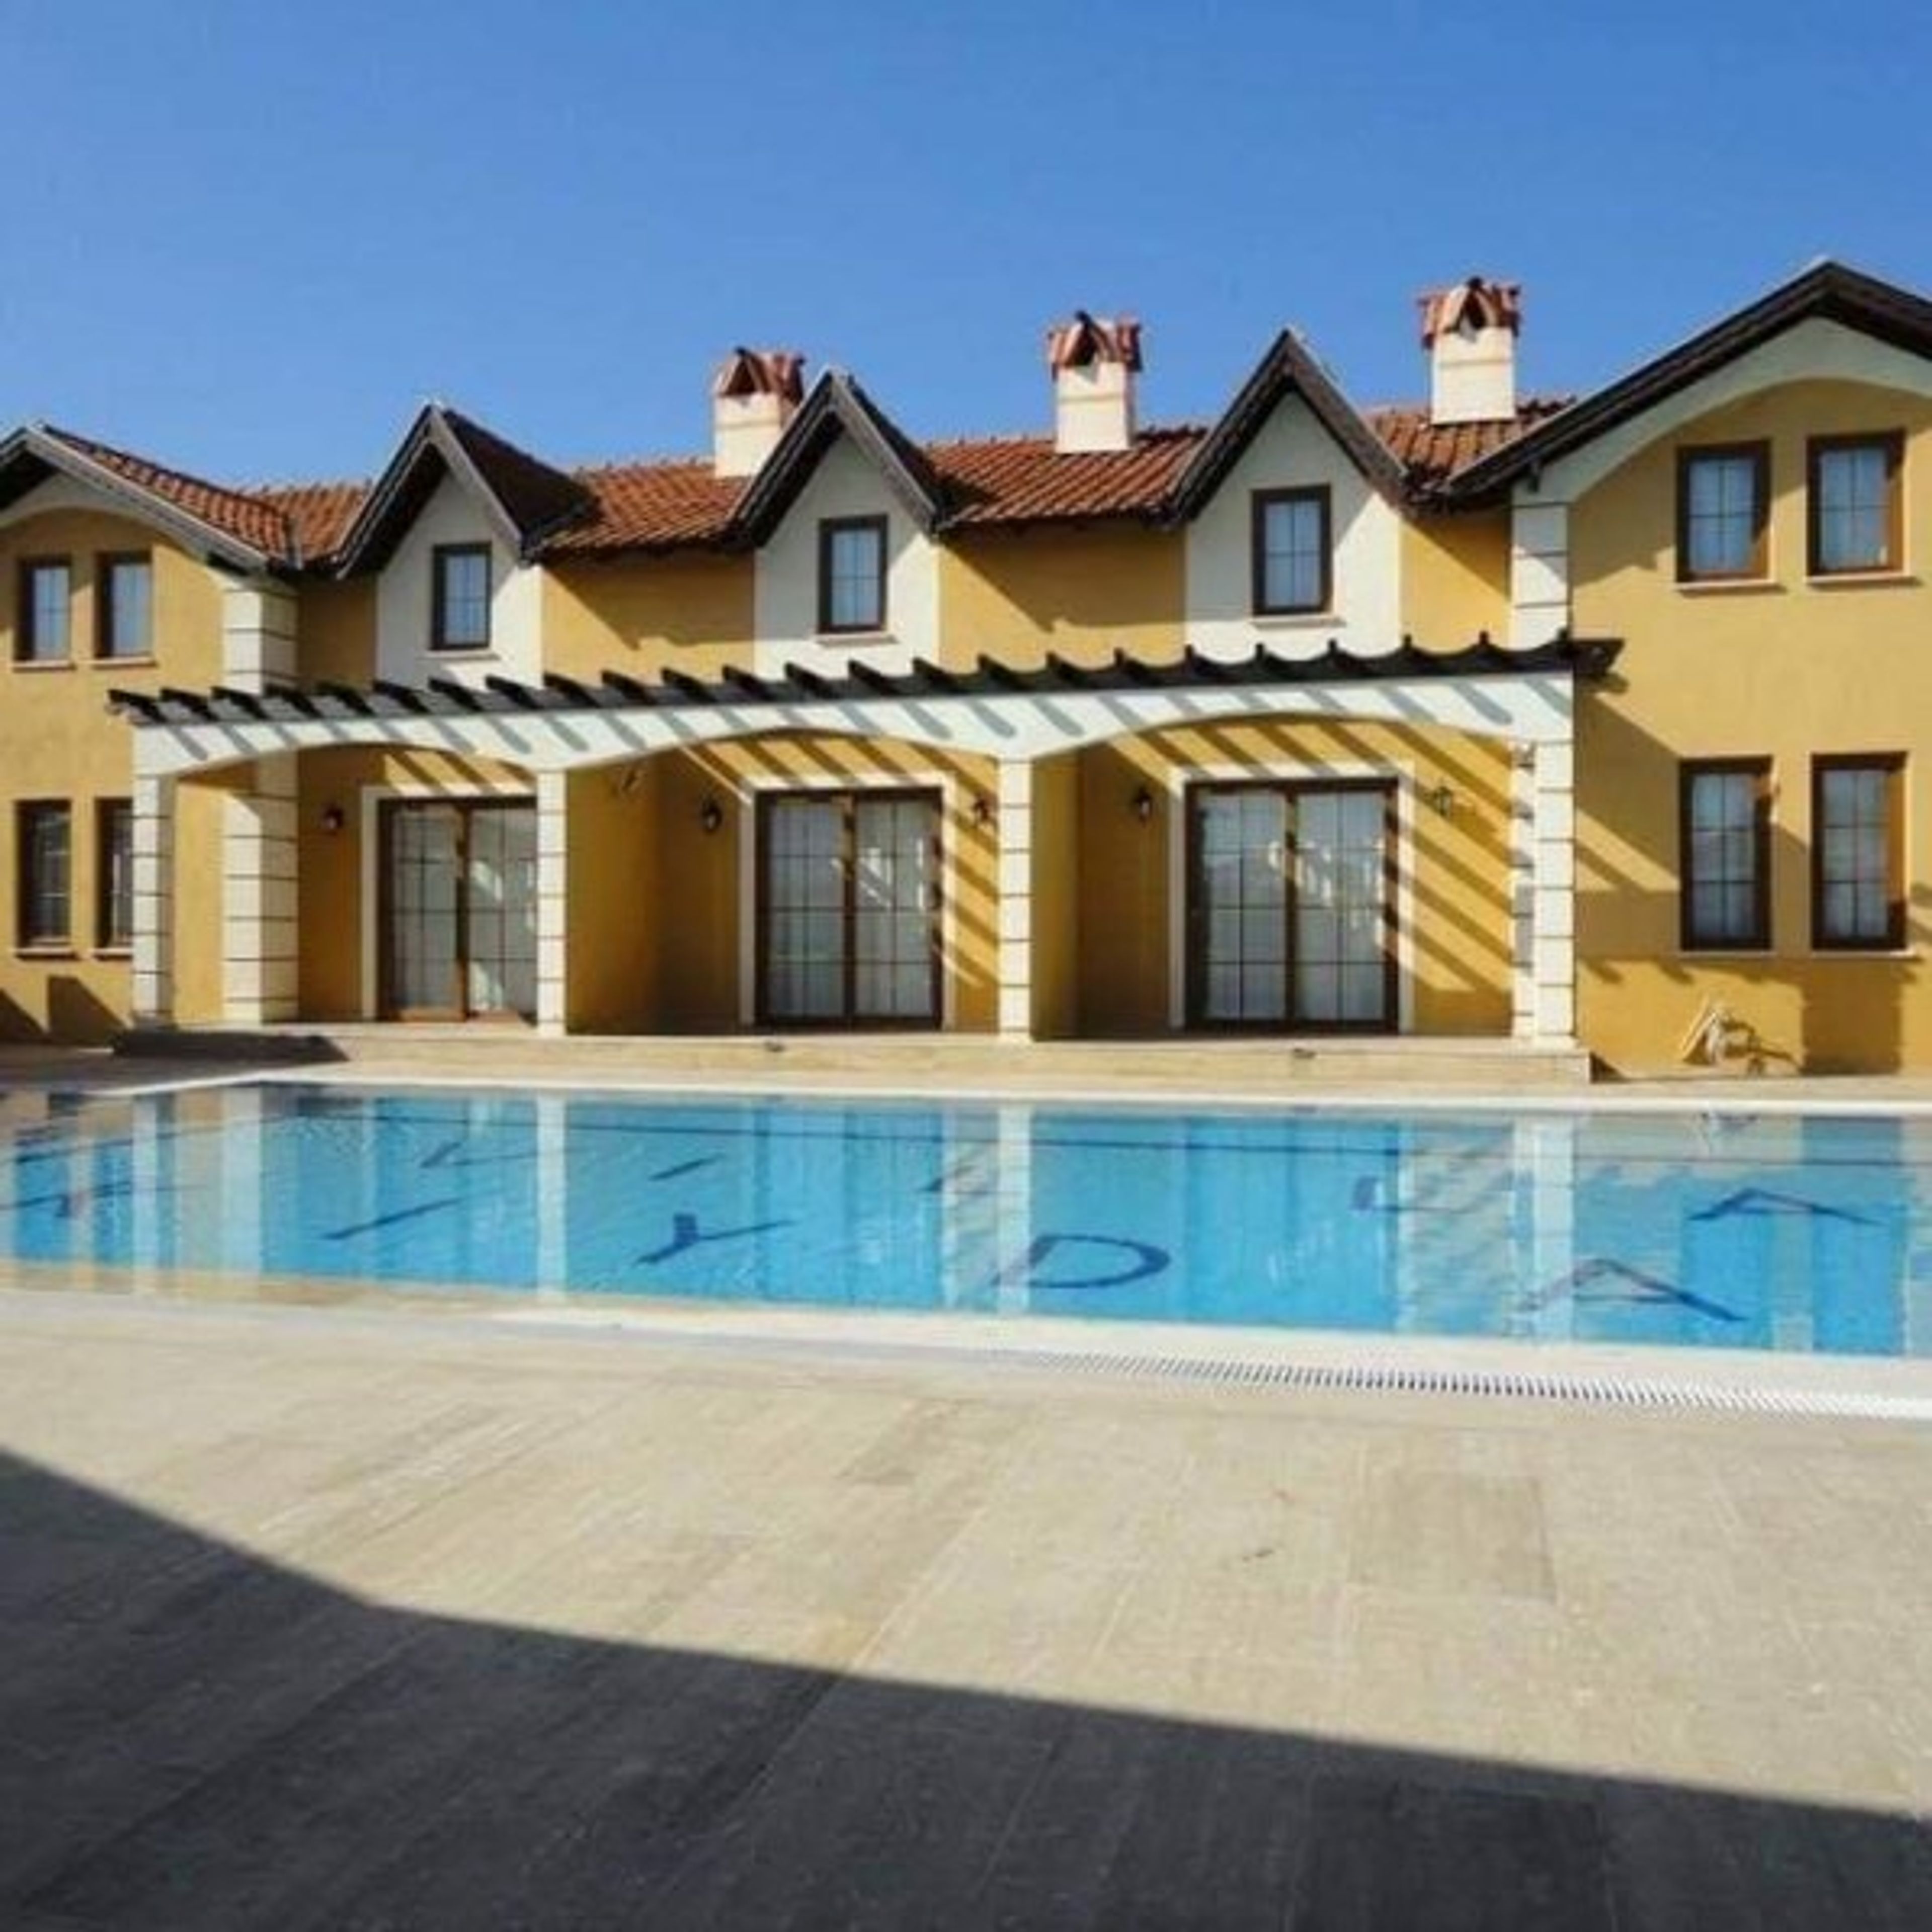 3 two bedroomed villas are by the swimming pool